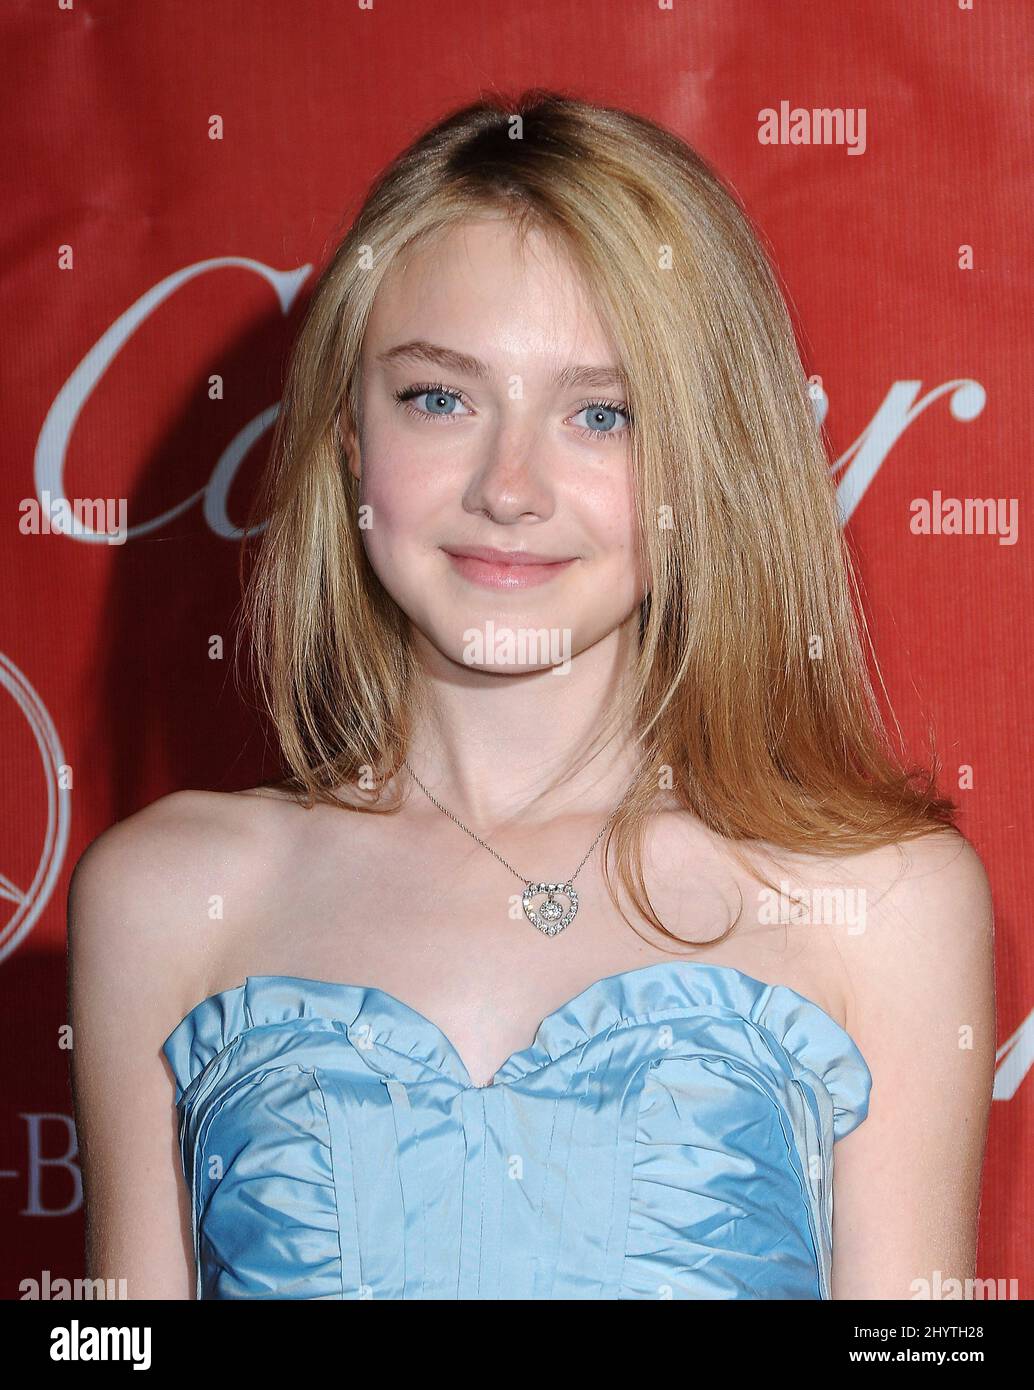 Dakota Fanning attends the 20th Annual Palm Springs International Film Festival Awards Gala at the Palm Springs Convention Center Stock Photo